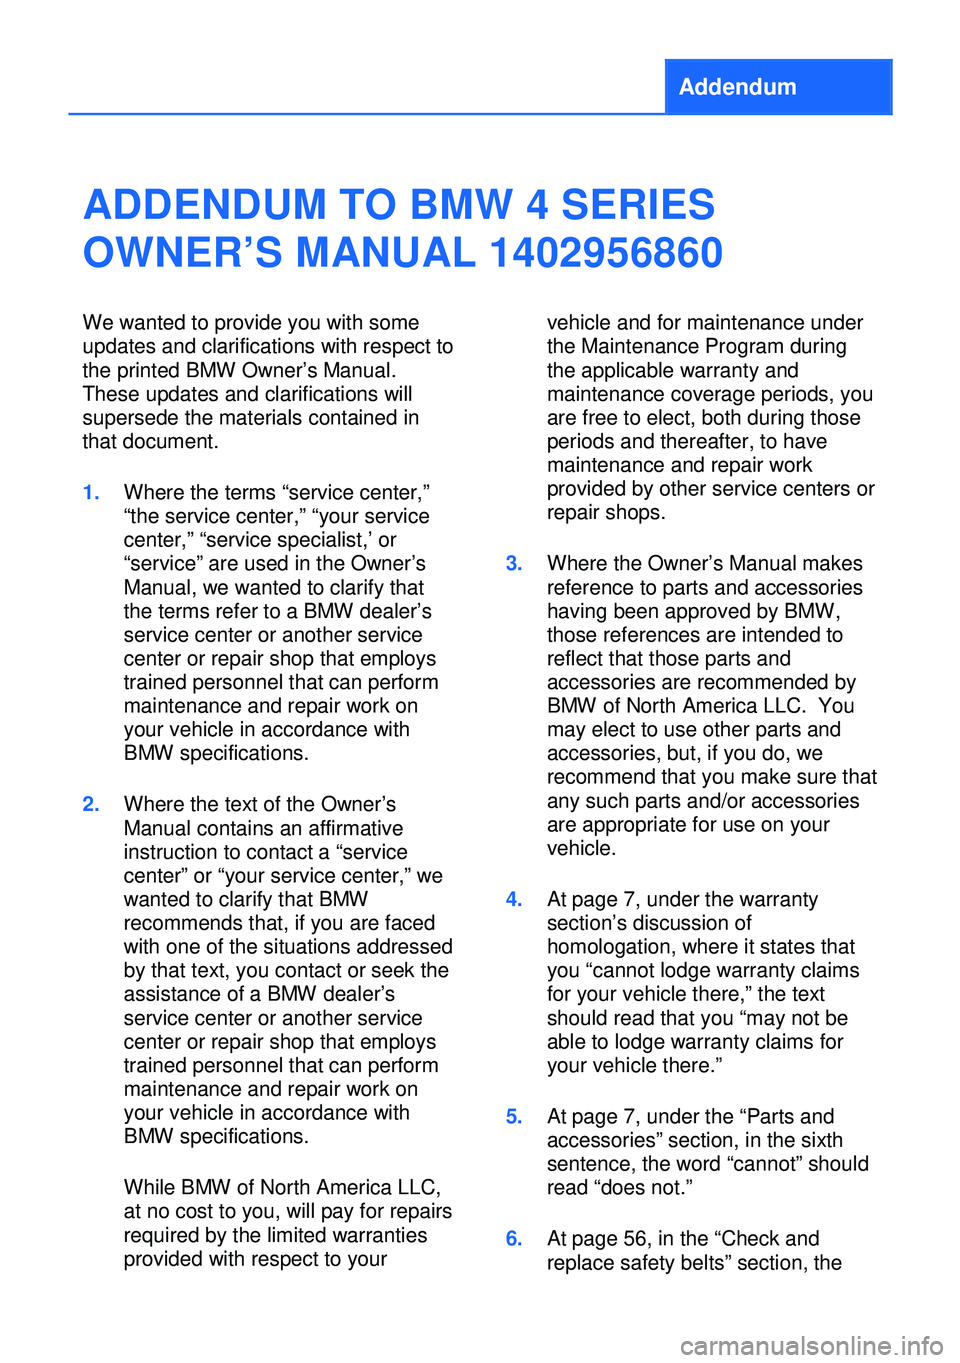 BMW 428I CONVERTIBLE 2014  Owners Manual Addendum
ADDENDUM TO BMW 4 SERIES
OWNER’S MANUAL 1402956860
We wanted to provide you with some
updates and clarifications with respect to
the printed BMW Owner’s Manual.
These updates and clarific